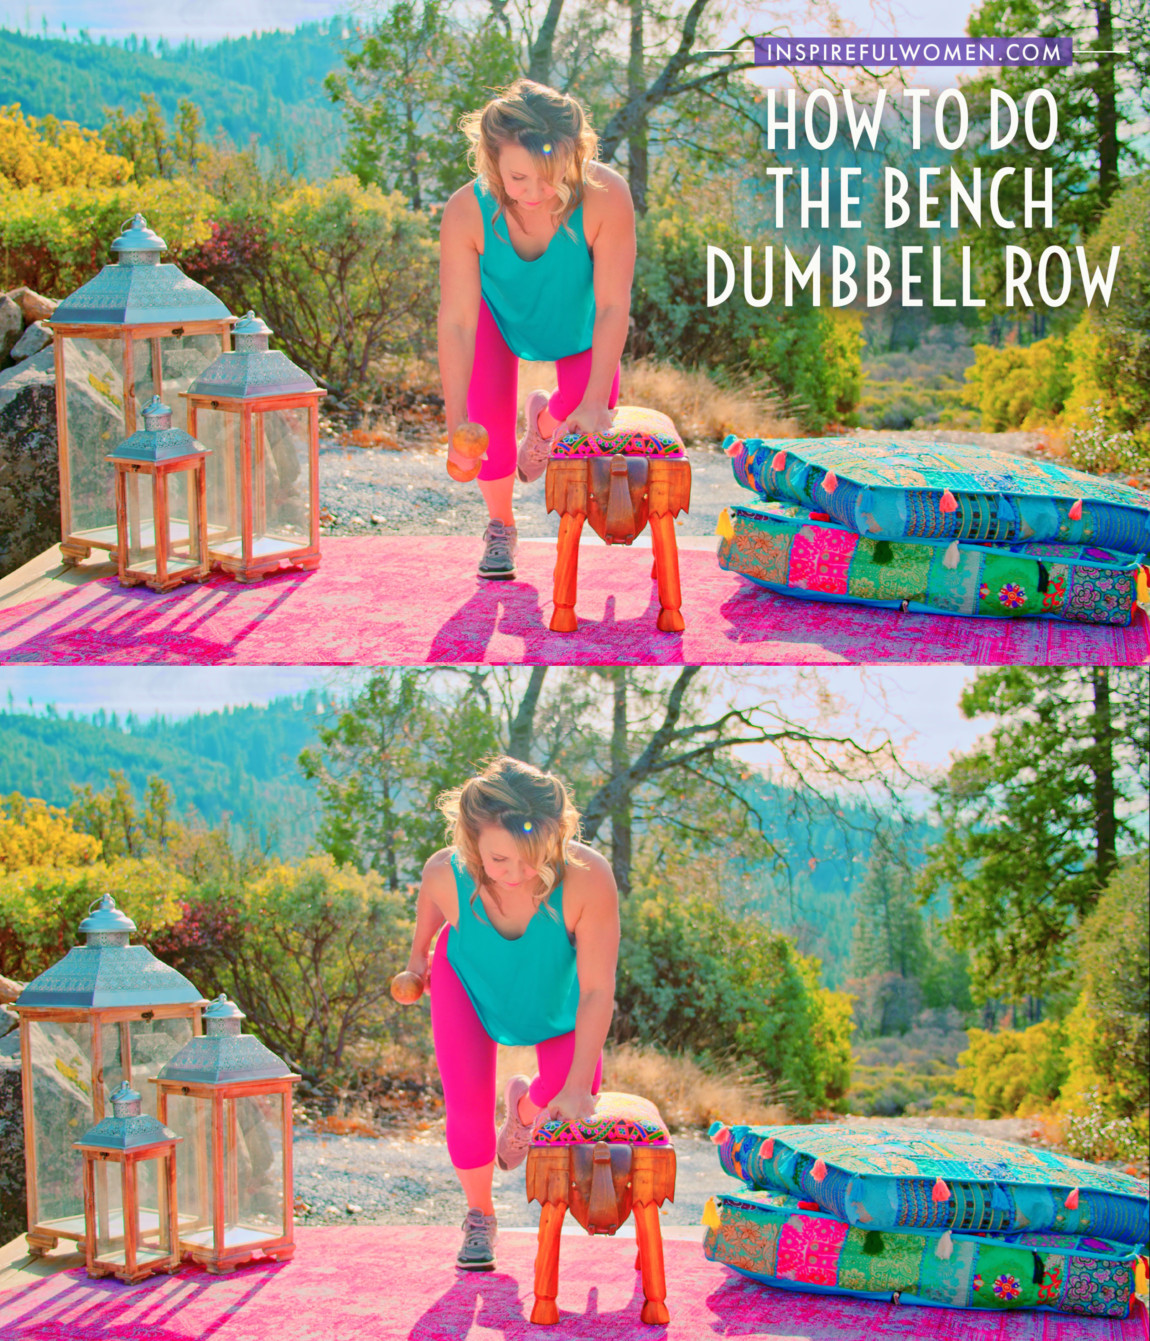 how-to-do-the-one-arm-dumbbell-row-with-bench-exercise-at-home-women-40-plus